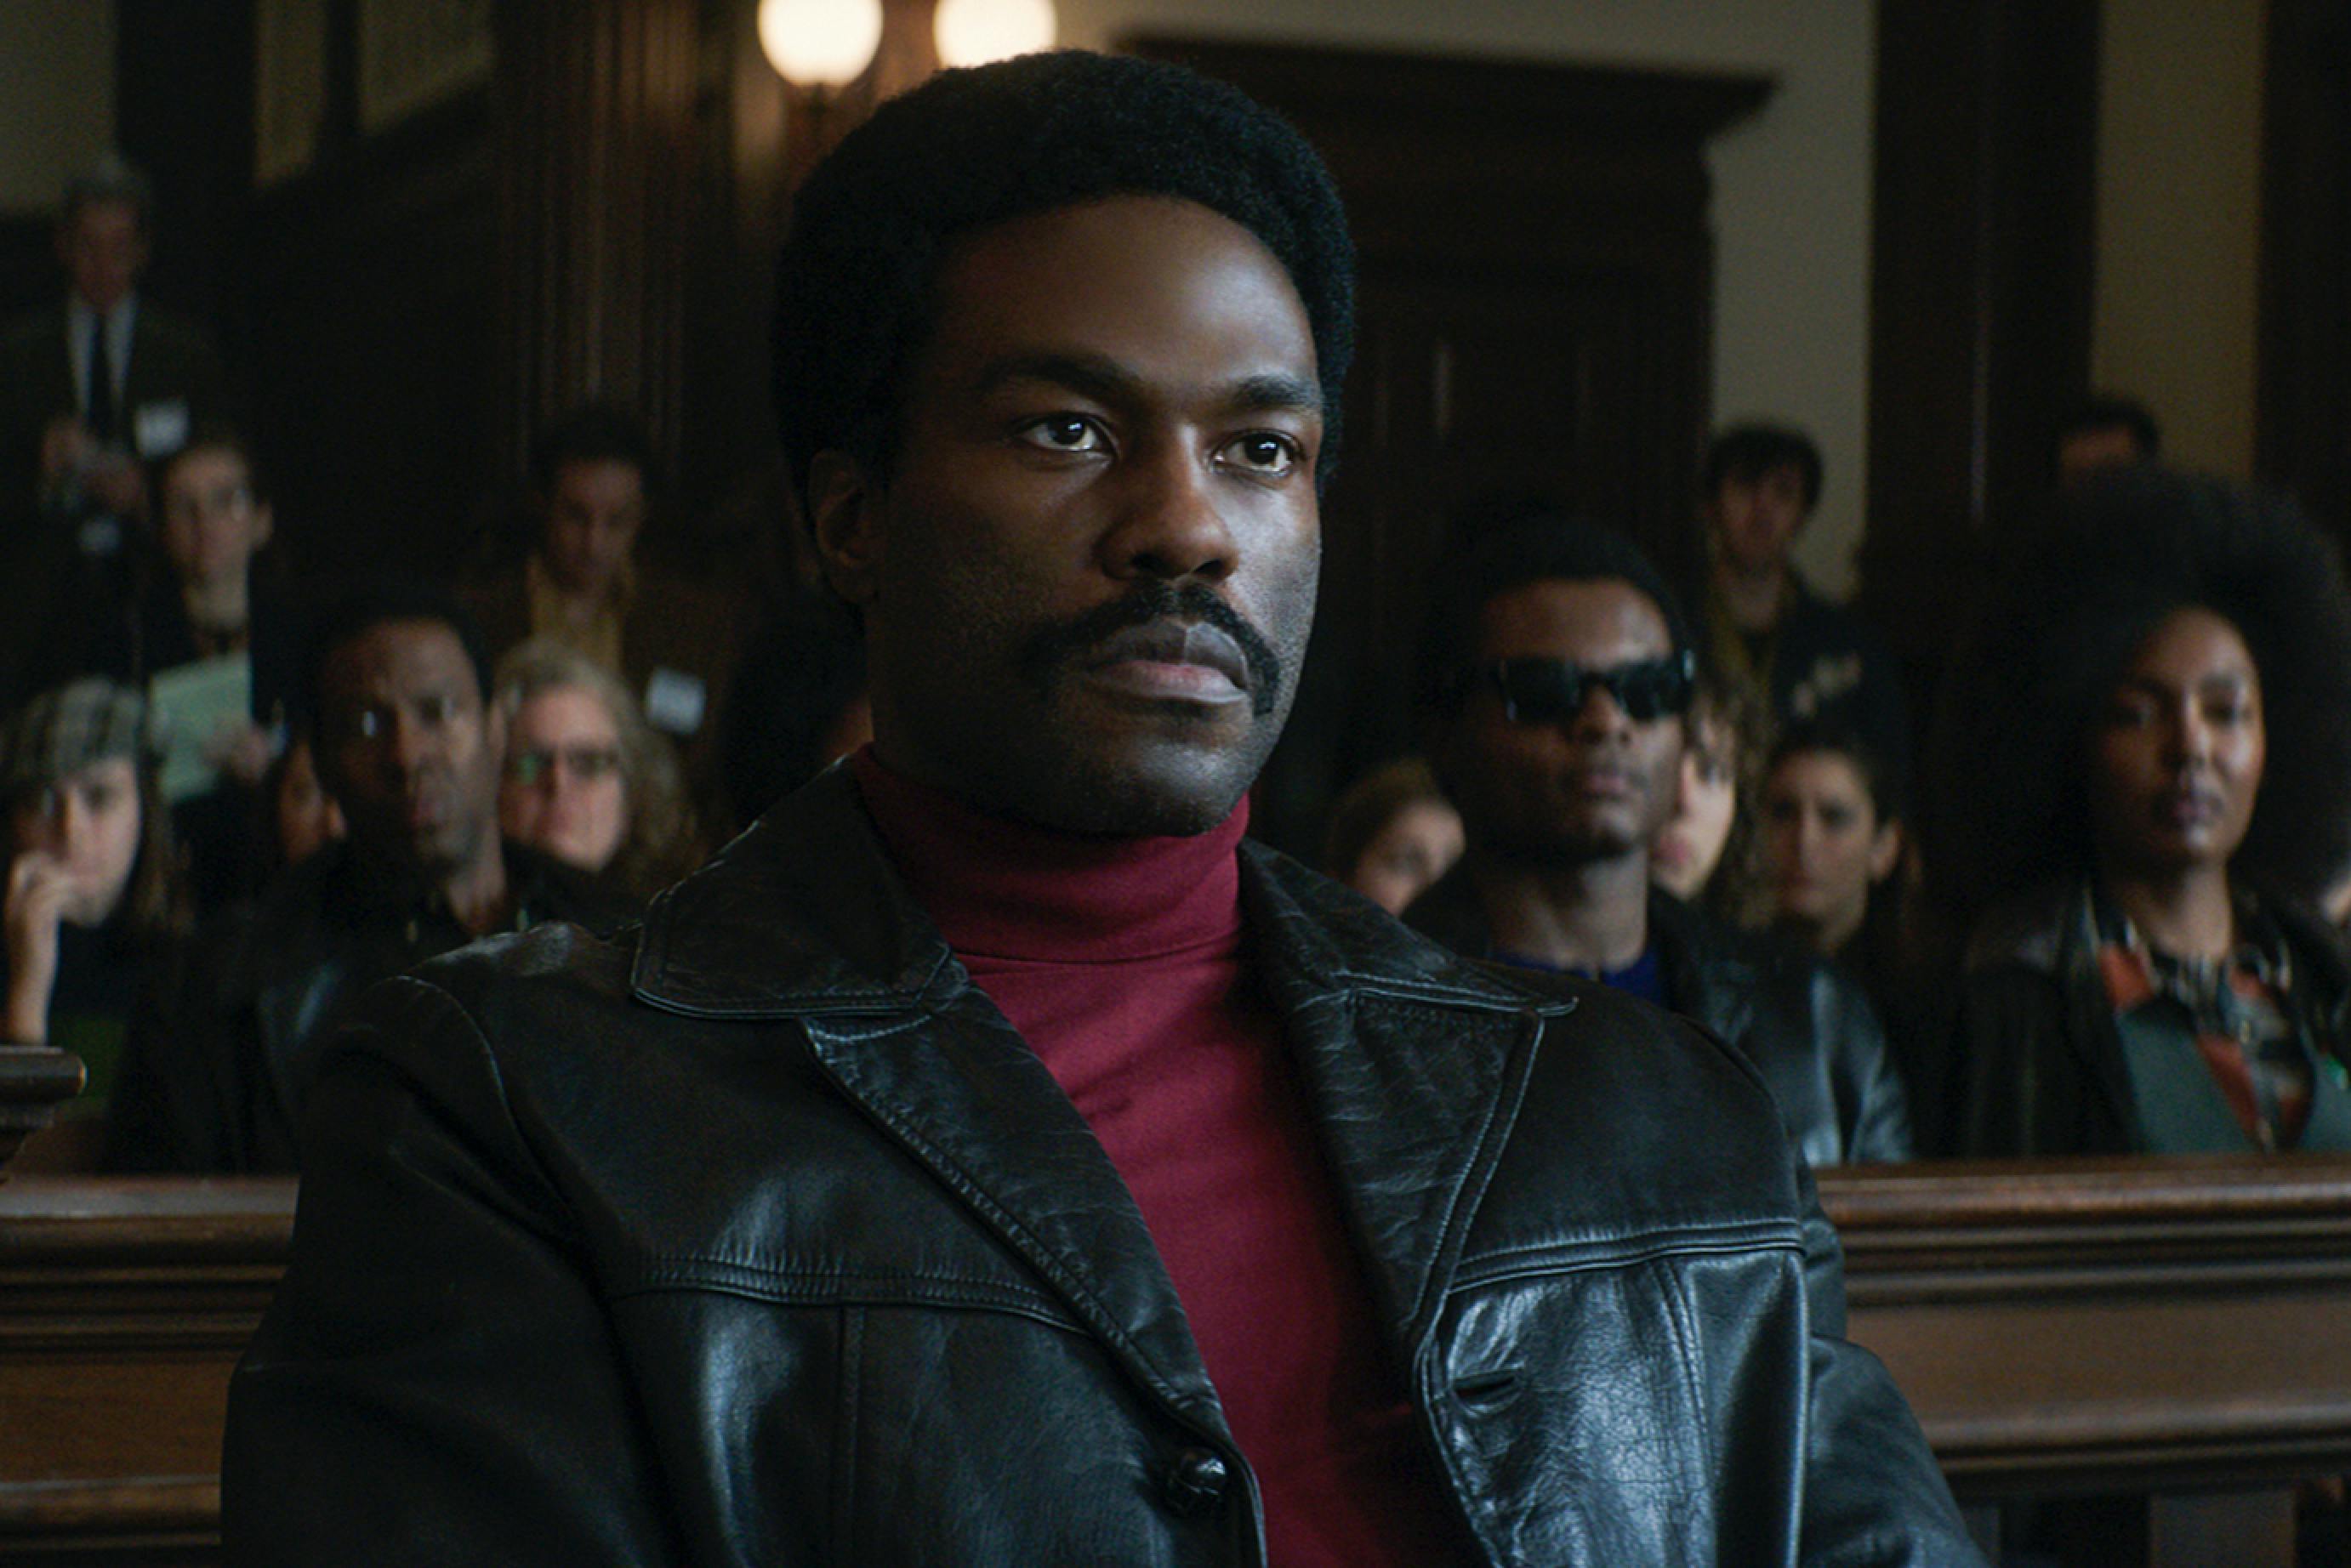 Bobby Seale, played by Yahya Abdul-Mateen II, in a courtroom scene from The Trial of the Chicago 7. Seated as a defendant, he wears a red turtleneck and black leather jacket. He is stone-faced, but behind his eyes we can see power and righteous defiance. He looks toward the bench, which is out of view. Behind him, in the gallery of the court, are several members of the Black Panther Party. 